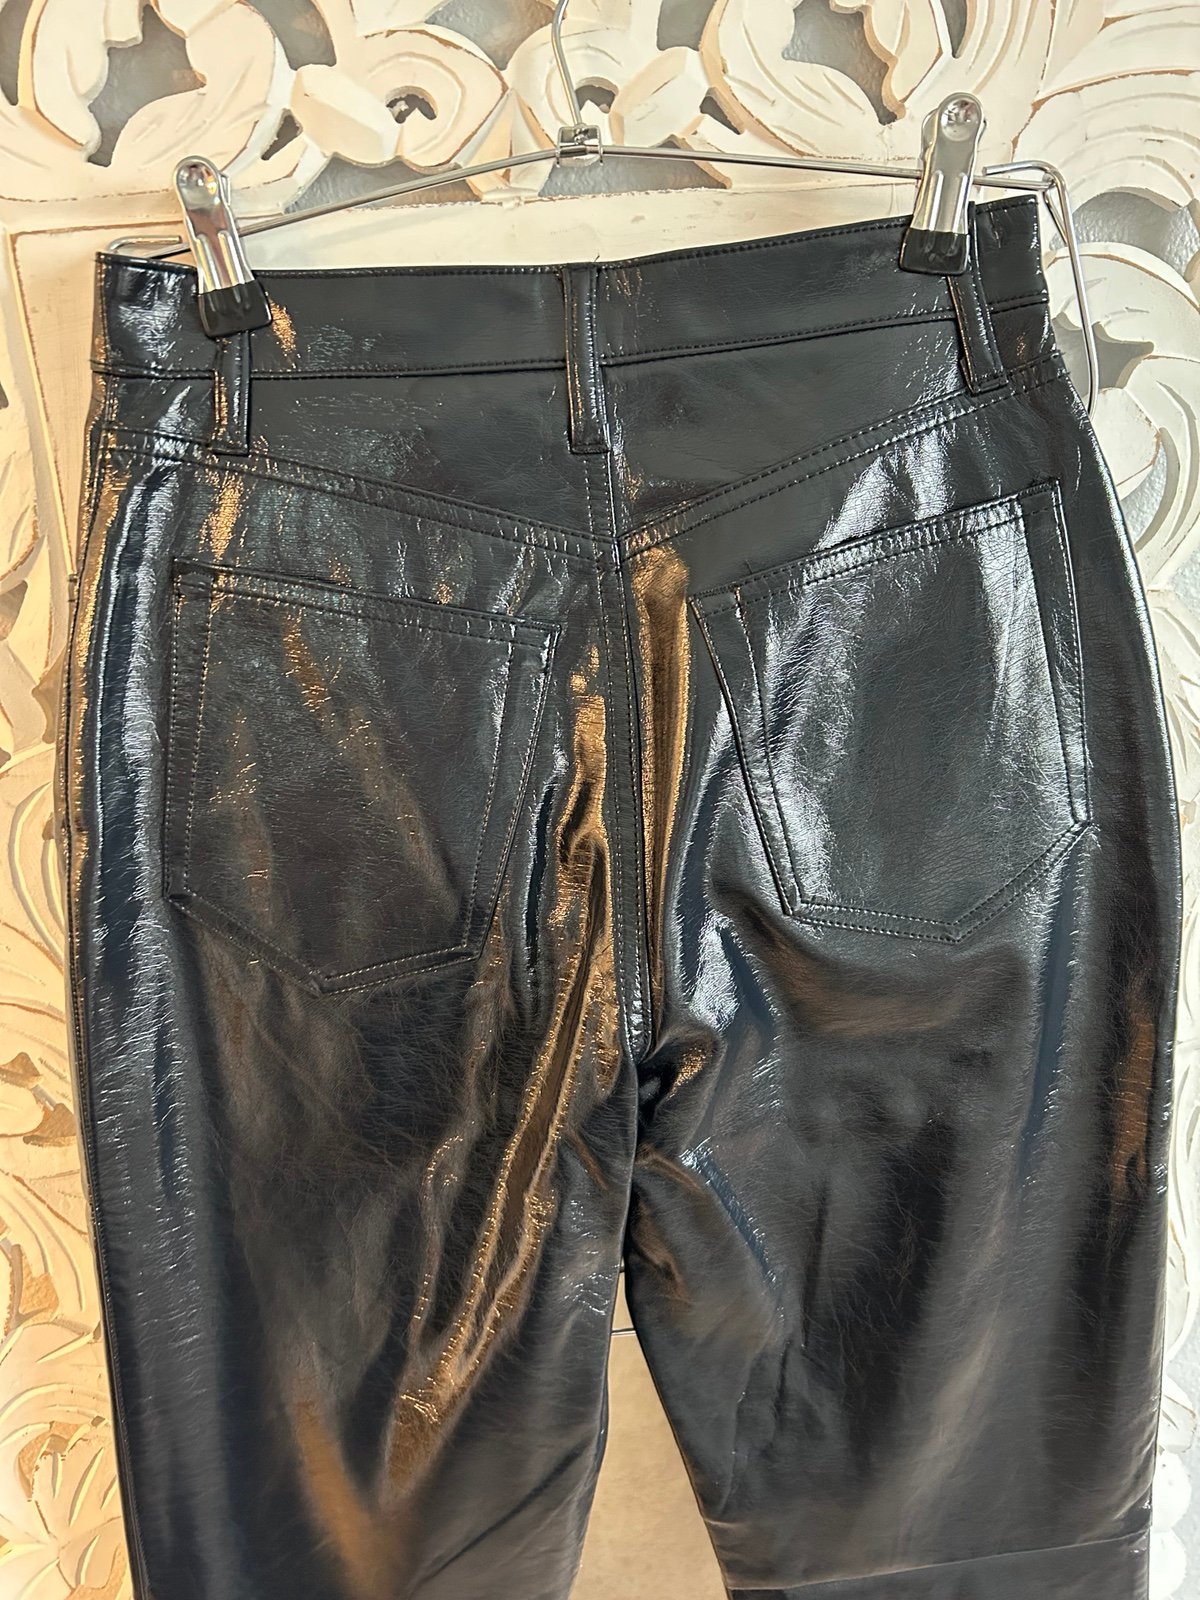 Simple Abercrombie and Finch, leather pants pJDnn2WCs US Outlet